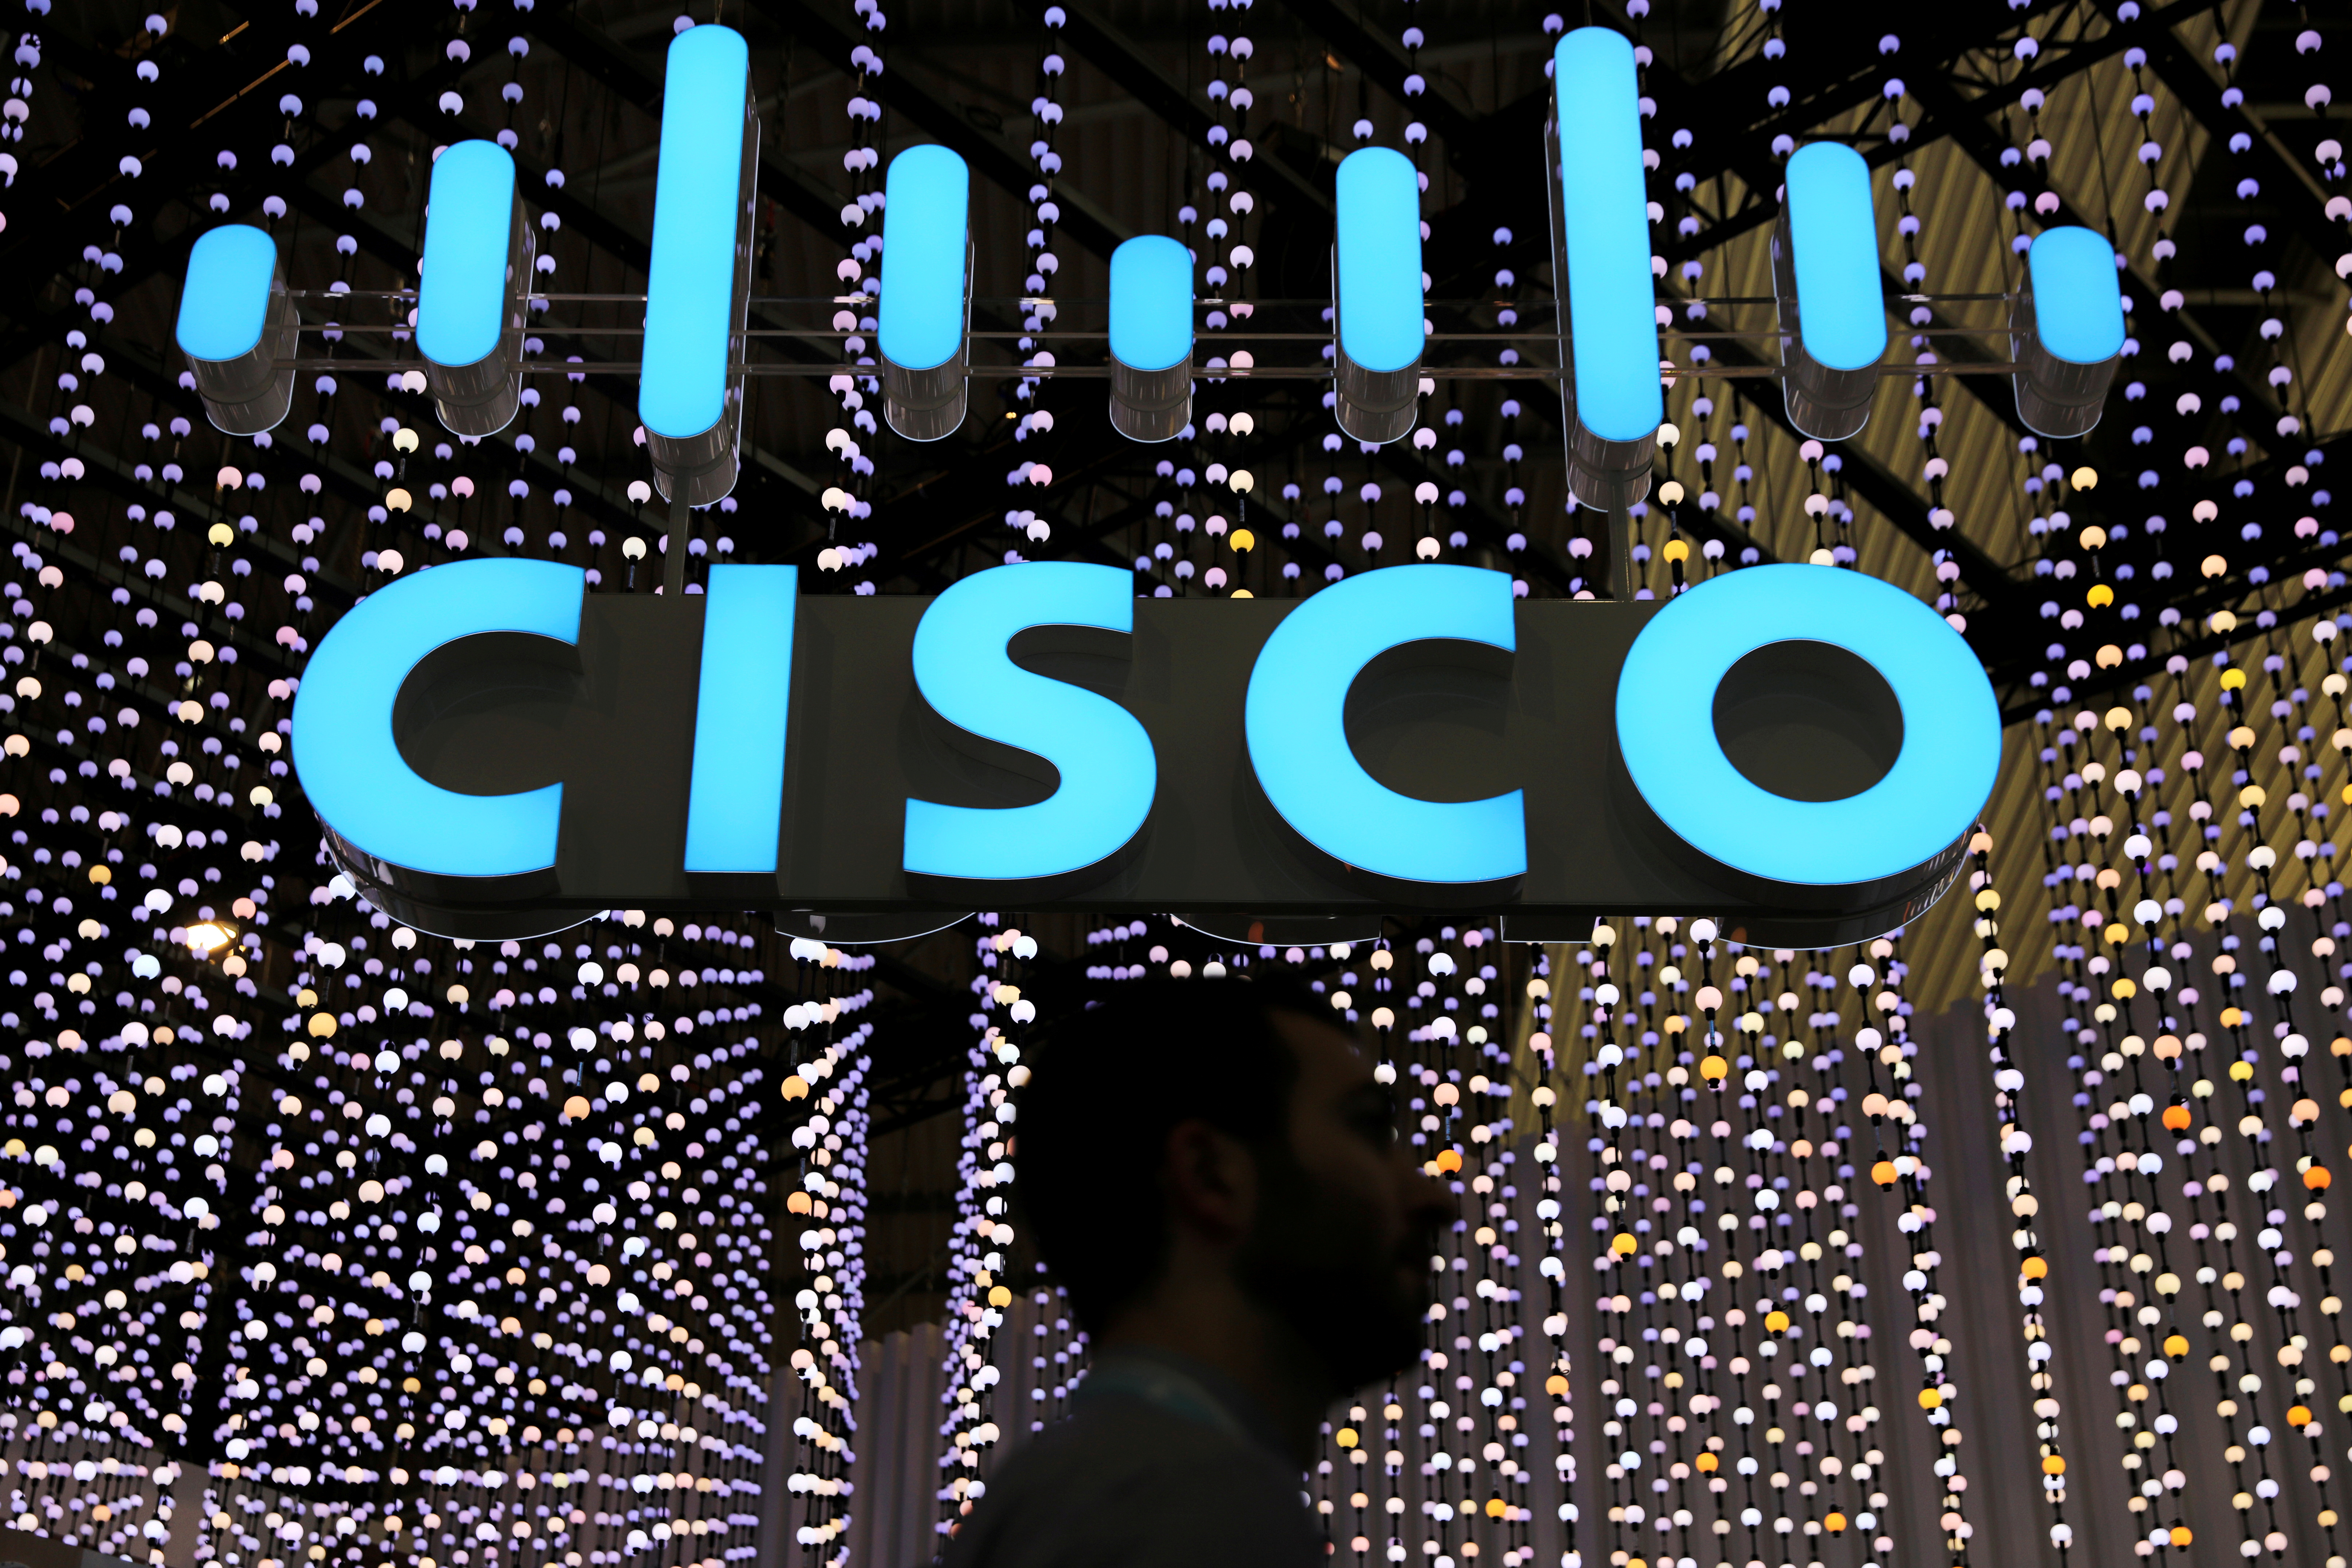 A man passes under a Cisco logo at the Mobile World Congress in Barcelona